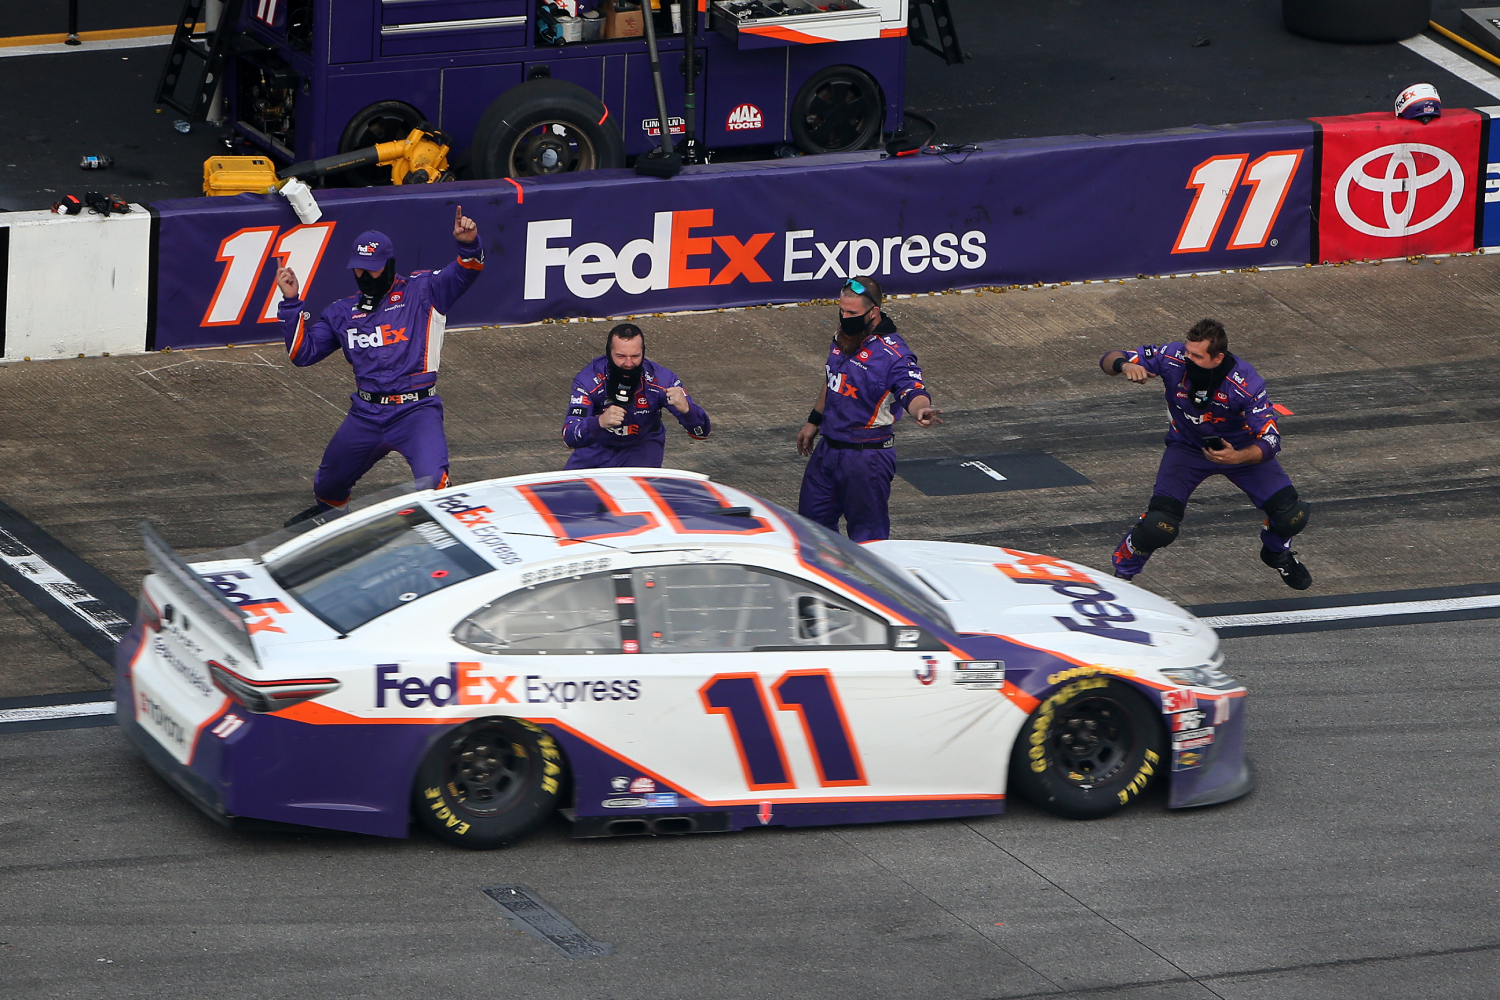 Denny Hamlin knew he was destined for racing at age 7.